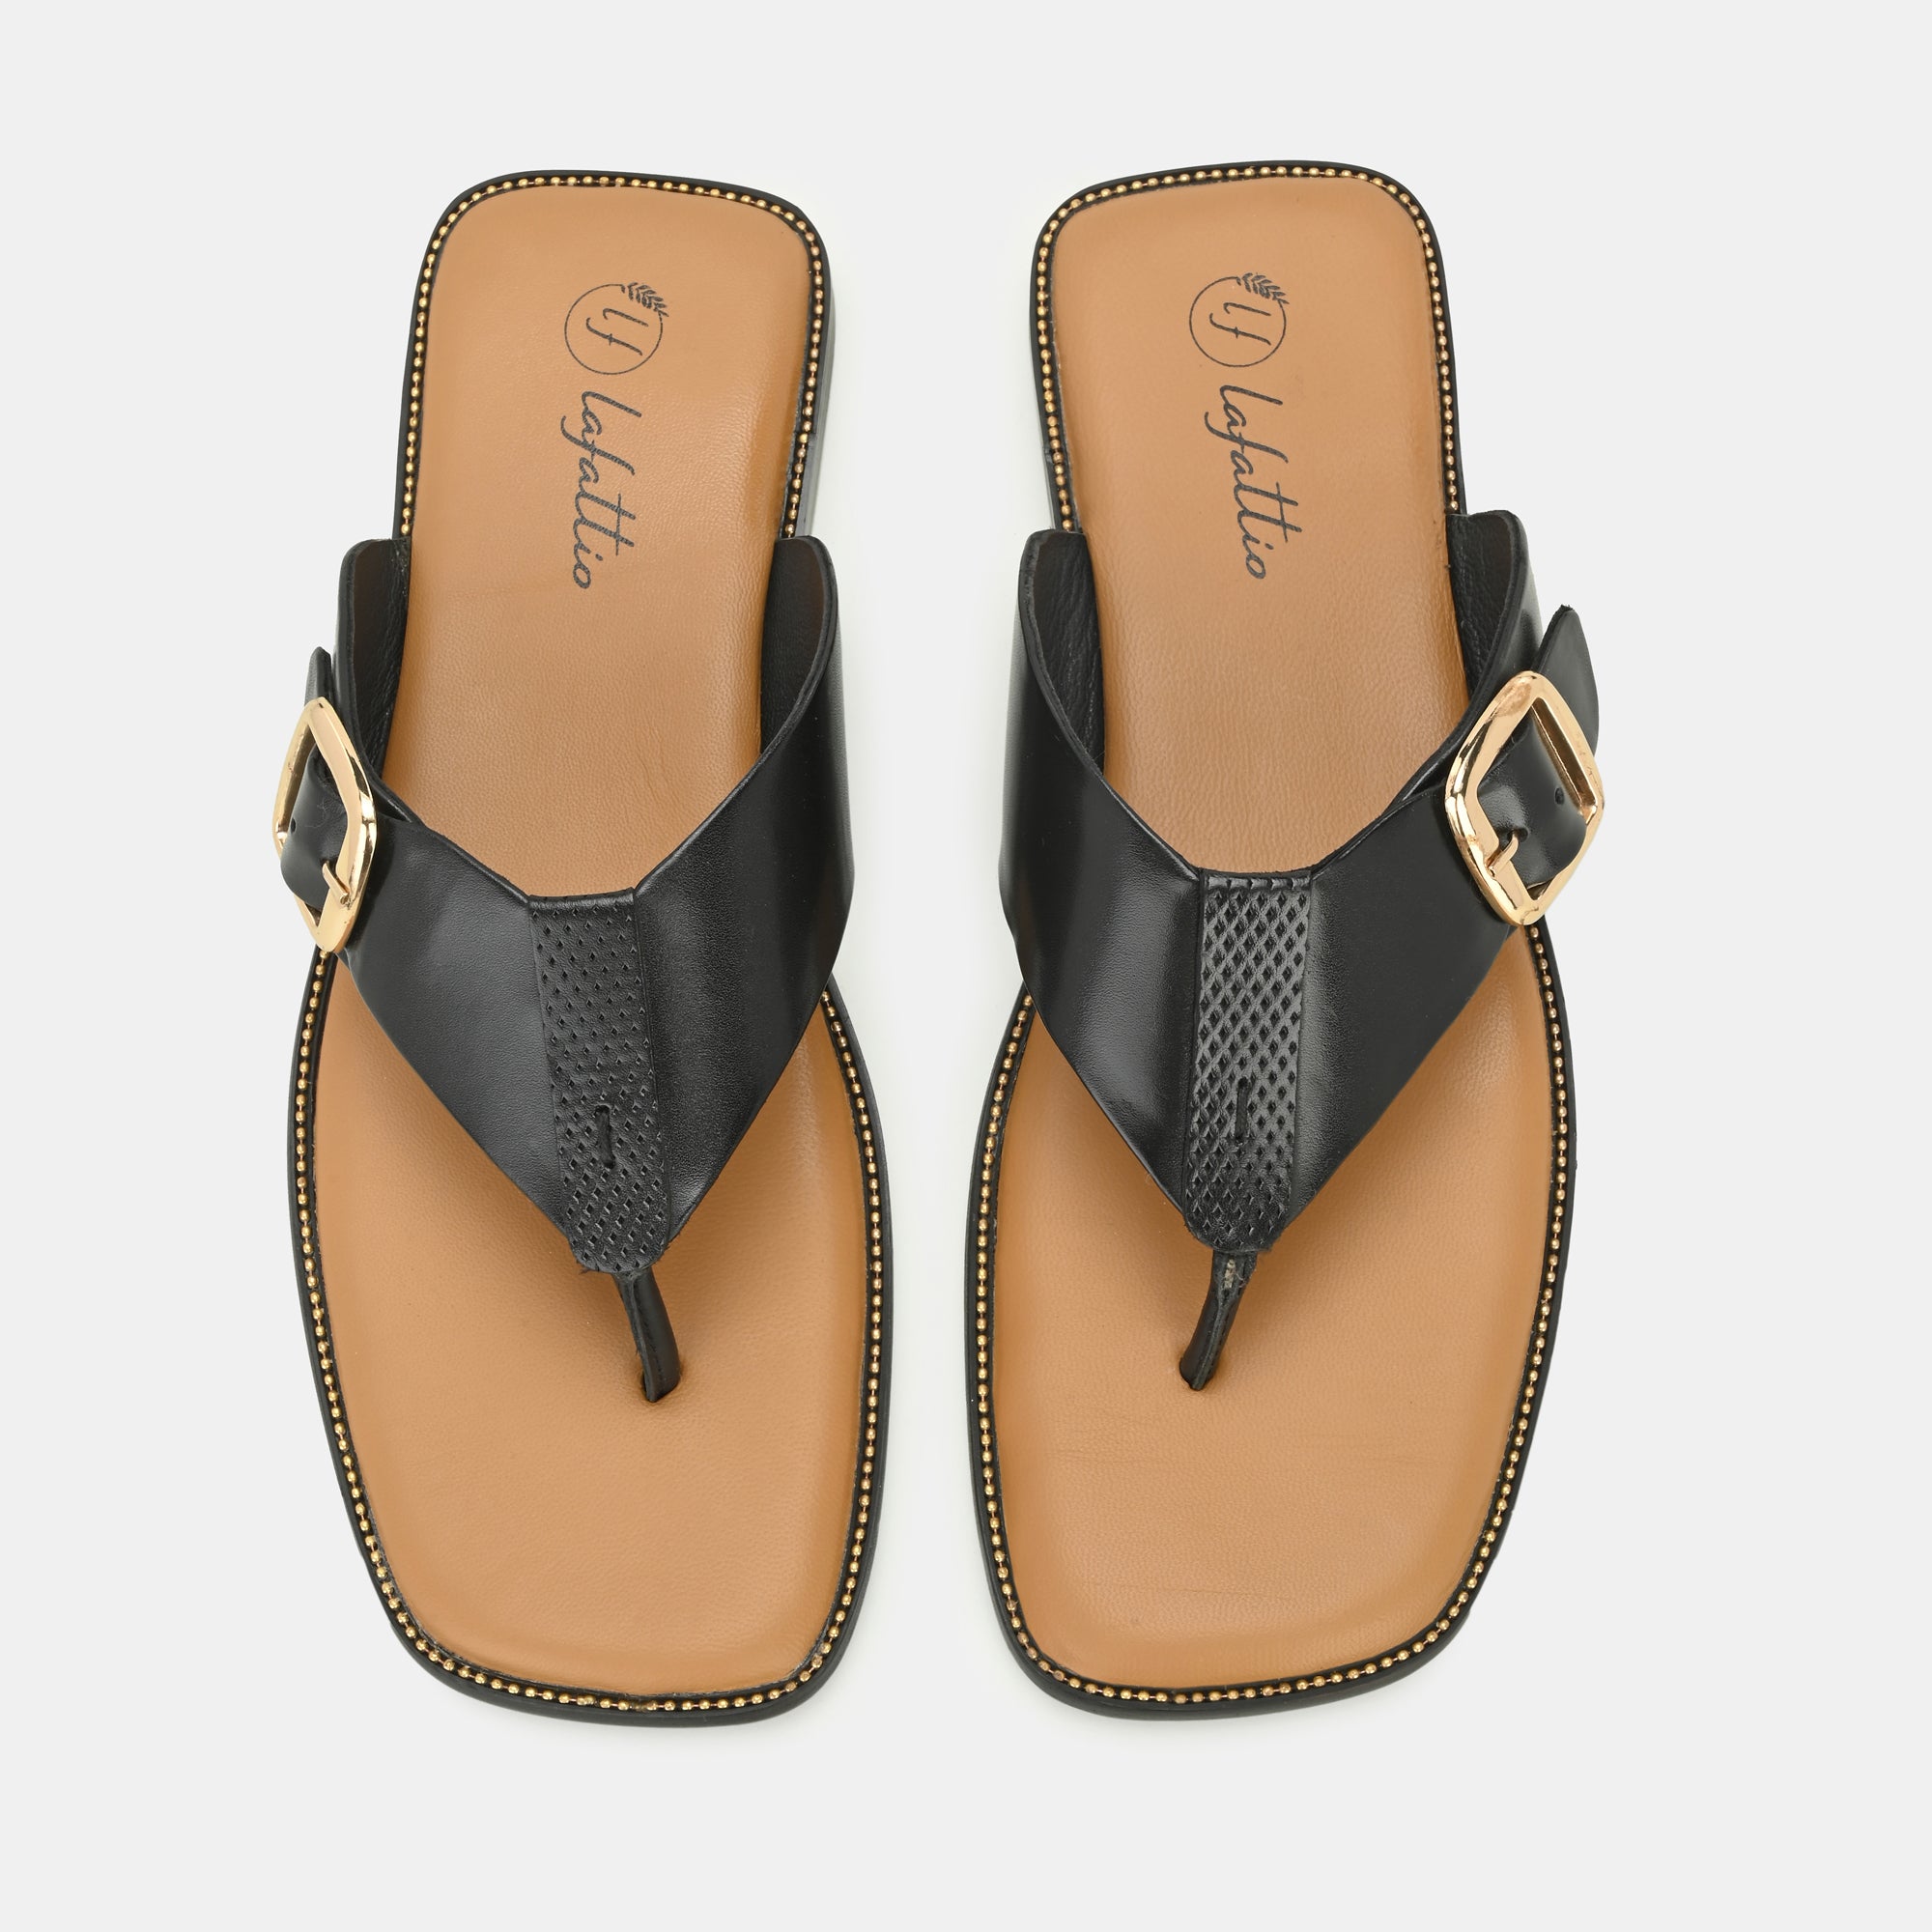 Black Buckled Slippers By Lafattio